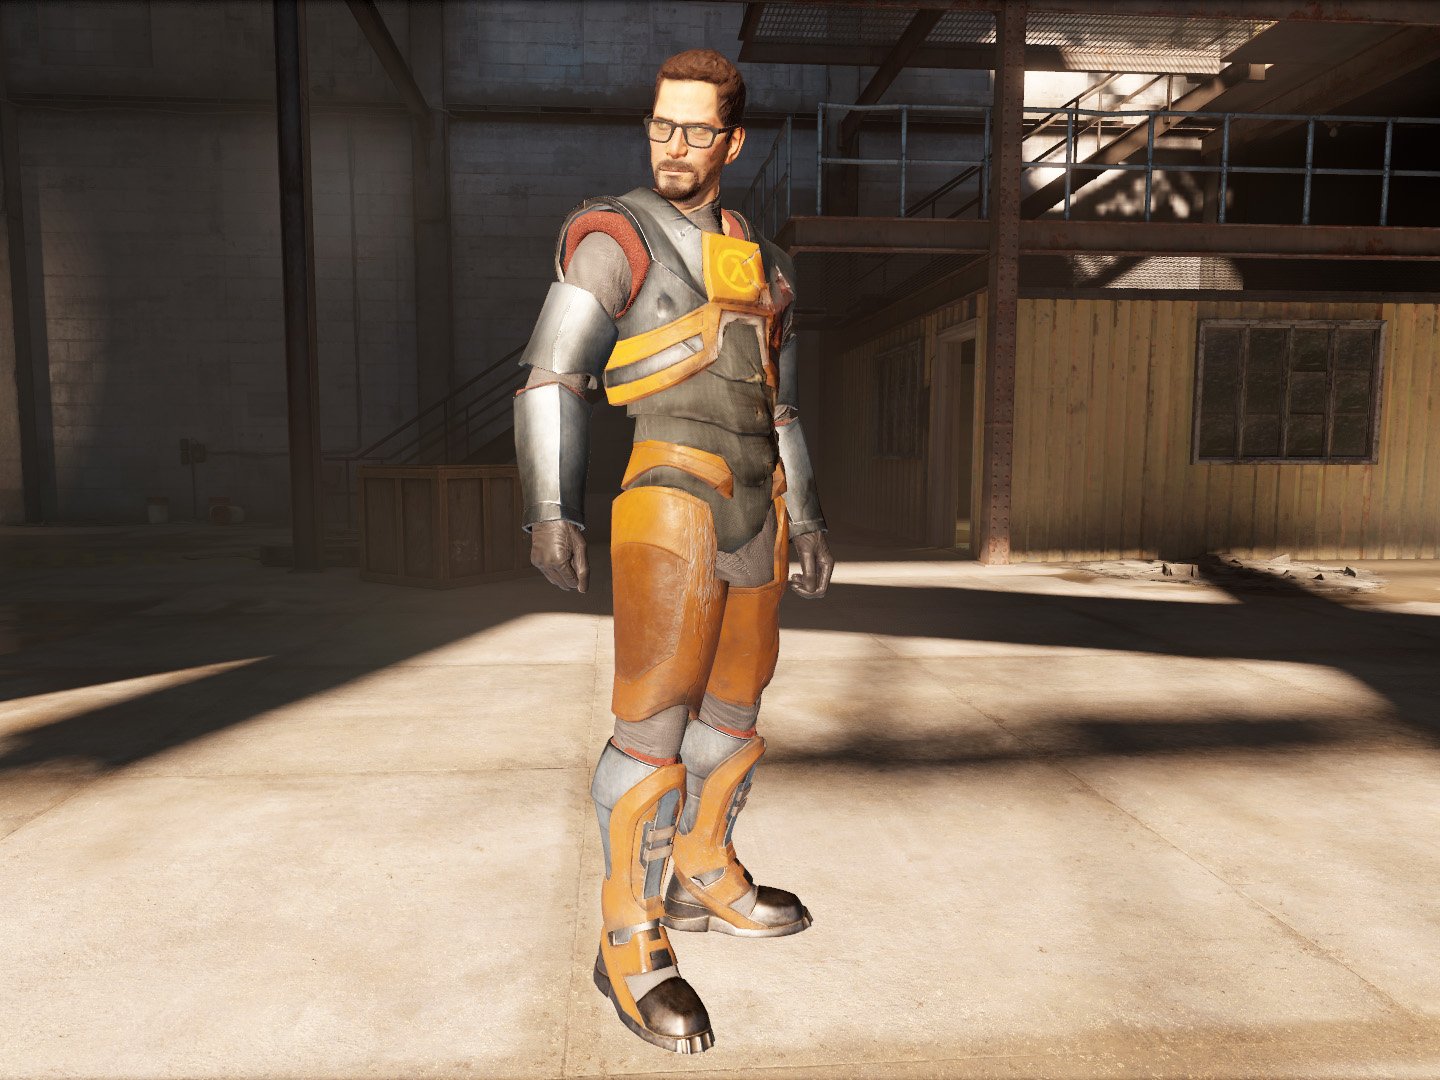 “An official Gordon Freeman model in 2020, never thought I'd see th...